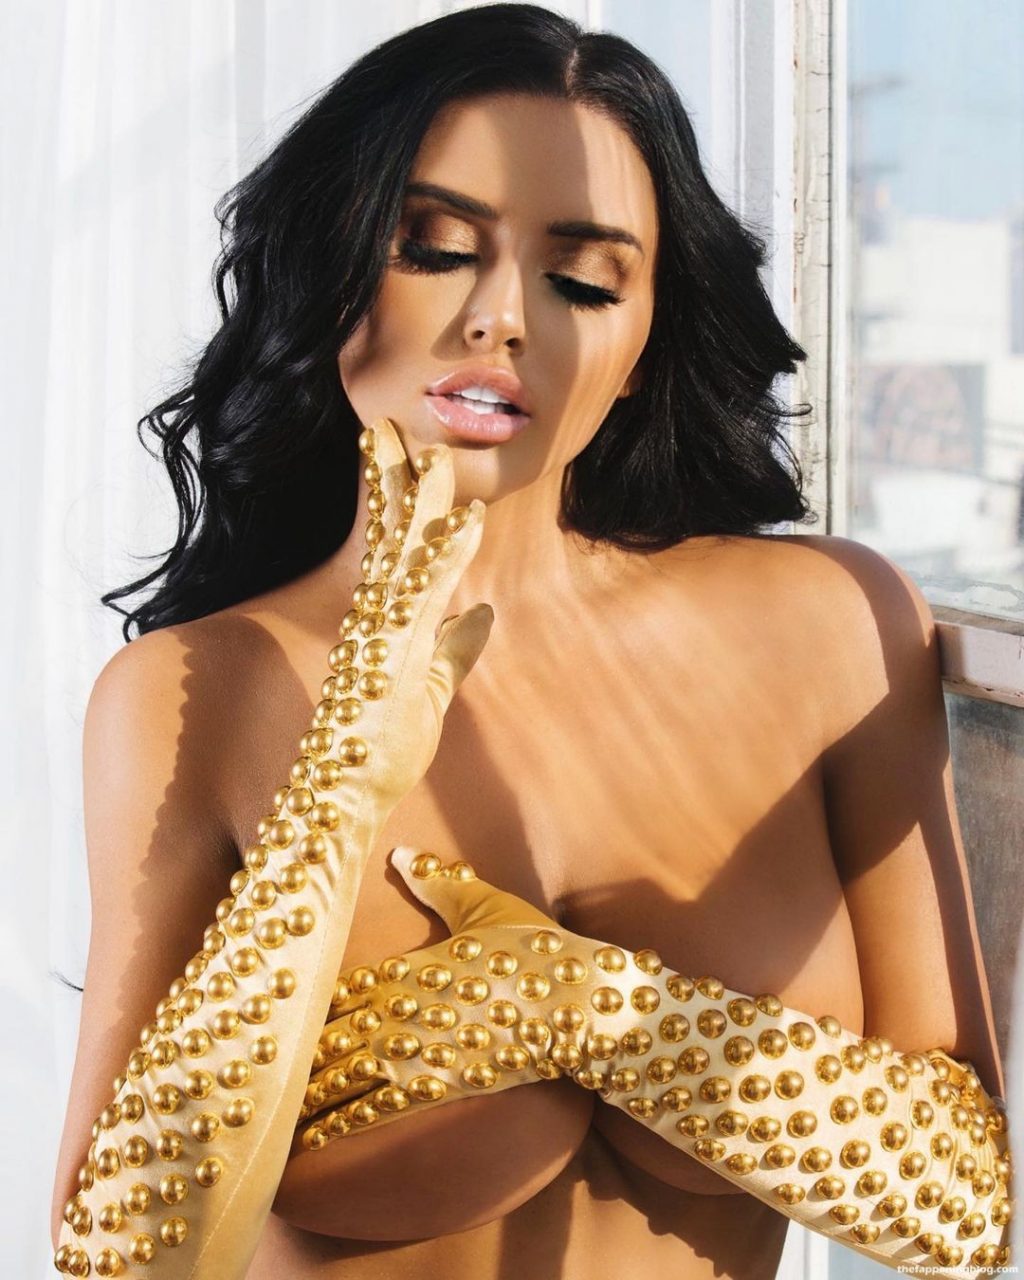 Abigail Ratchford Poses Topless (1 Photo)